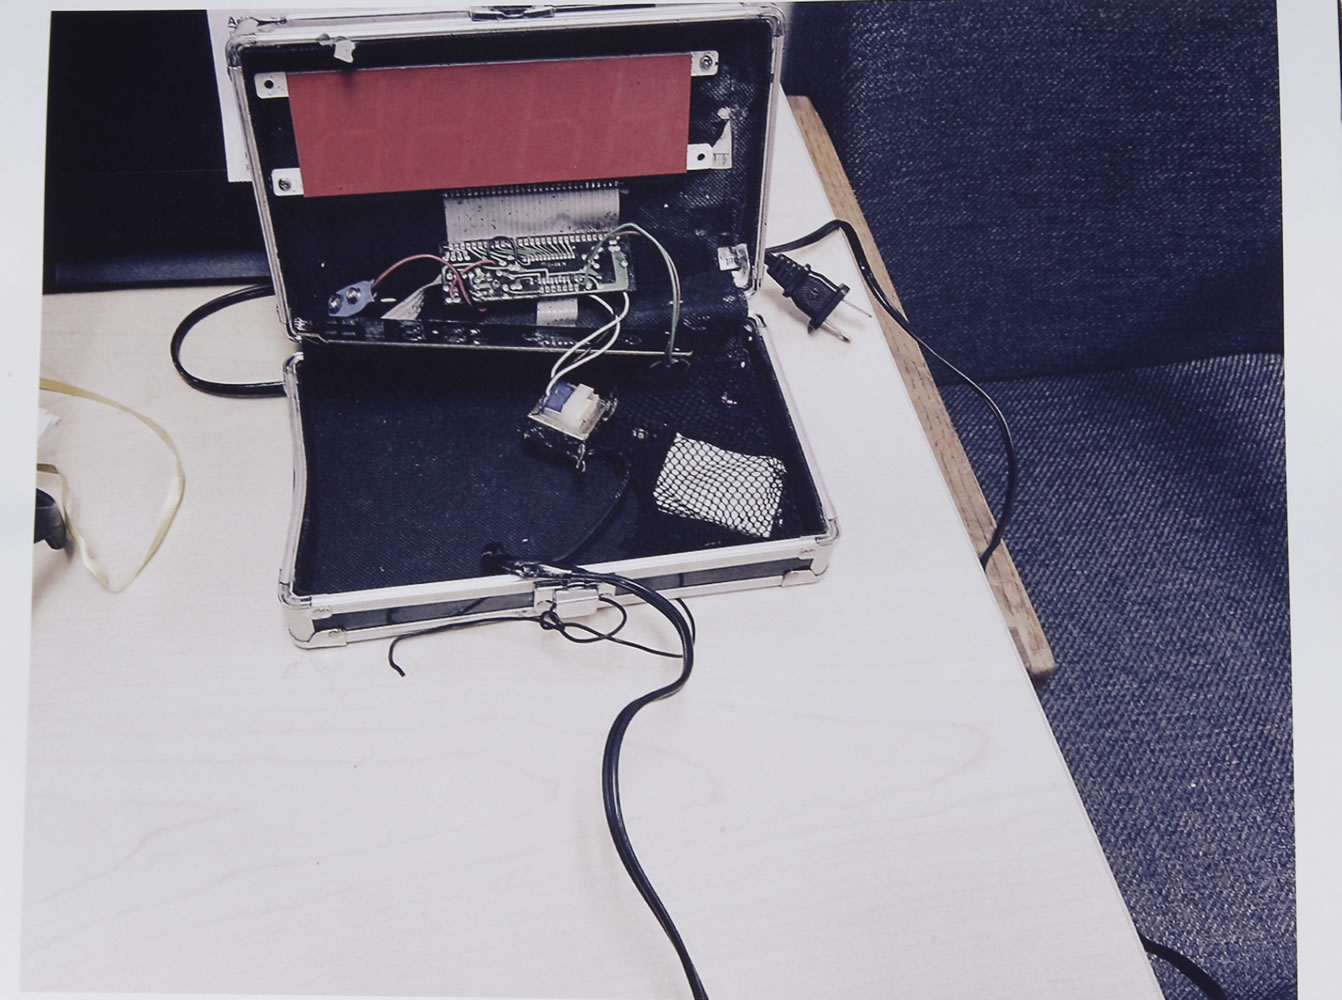 This photo provided by the Irving Police Department shows the homemade clock that Ahmed Mohamed brought to school in Irving, Texas. Police detained the 14-year-old Muslim boy after a teacher at MacArthur High School decided that the homemade clock he brought to class looked like a bomb, according to school and police officials. The family of Ahmed Mohamed said the boy was suspended for three days from the school in the Dallas suburb.